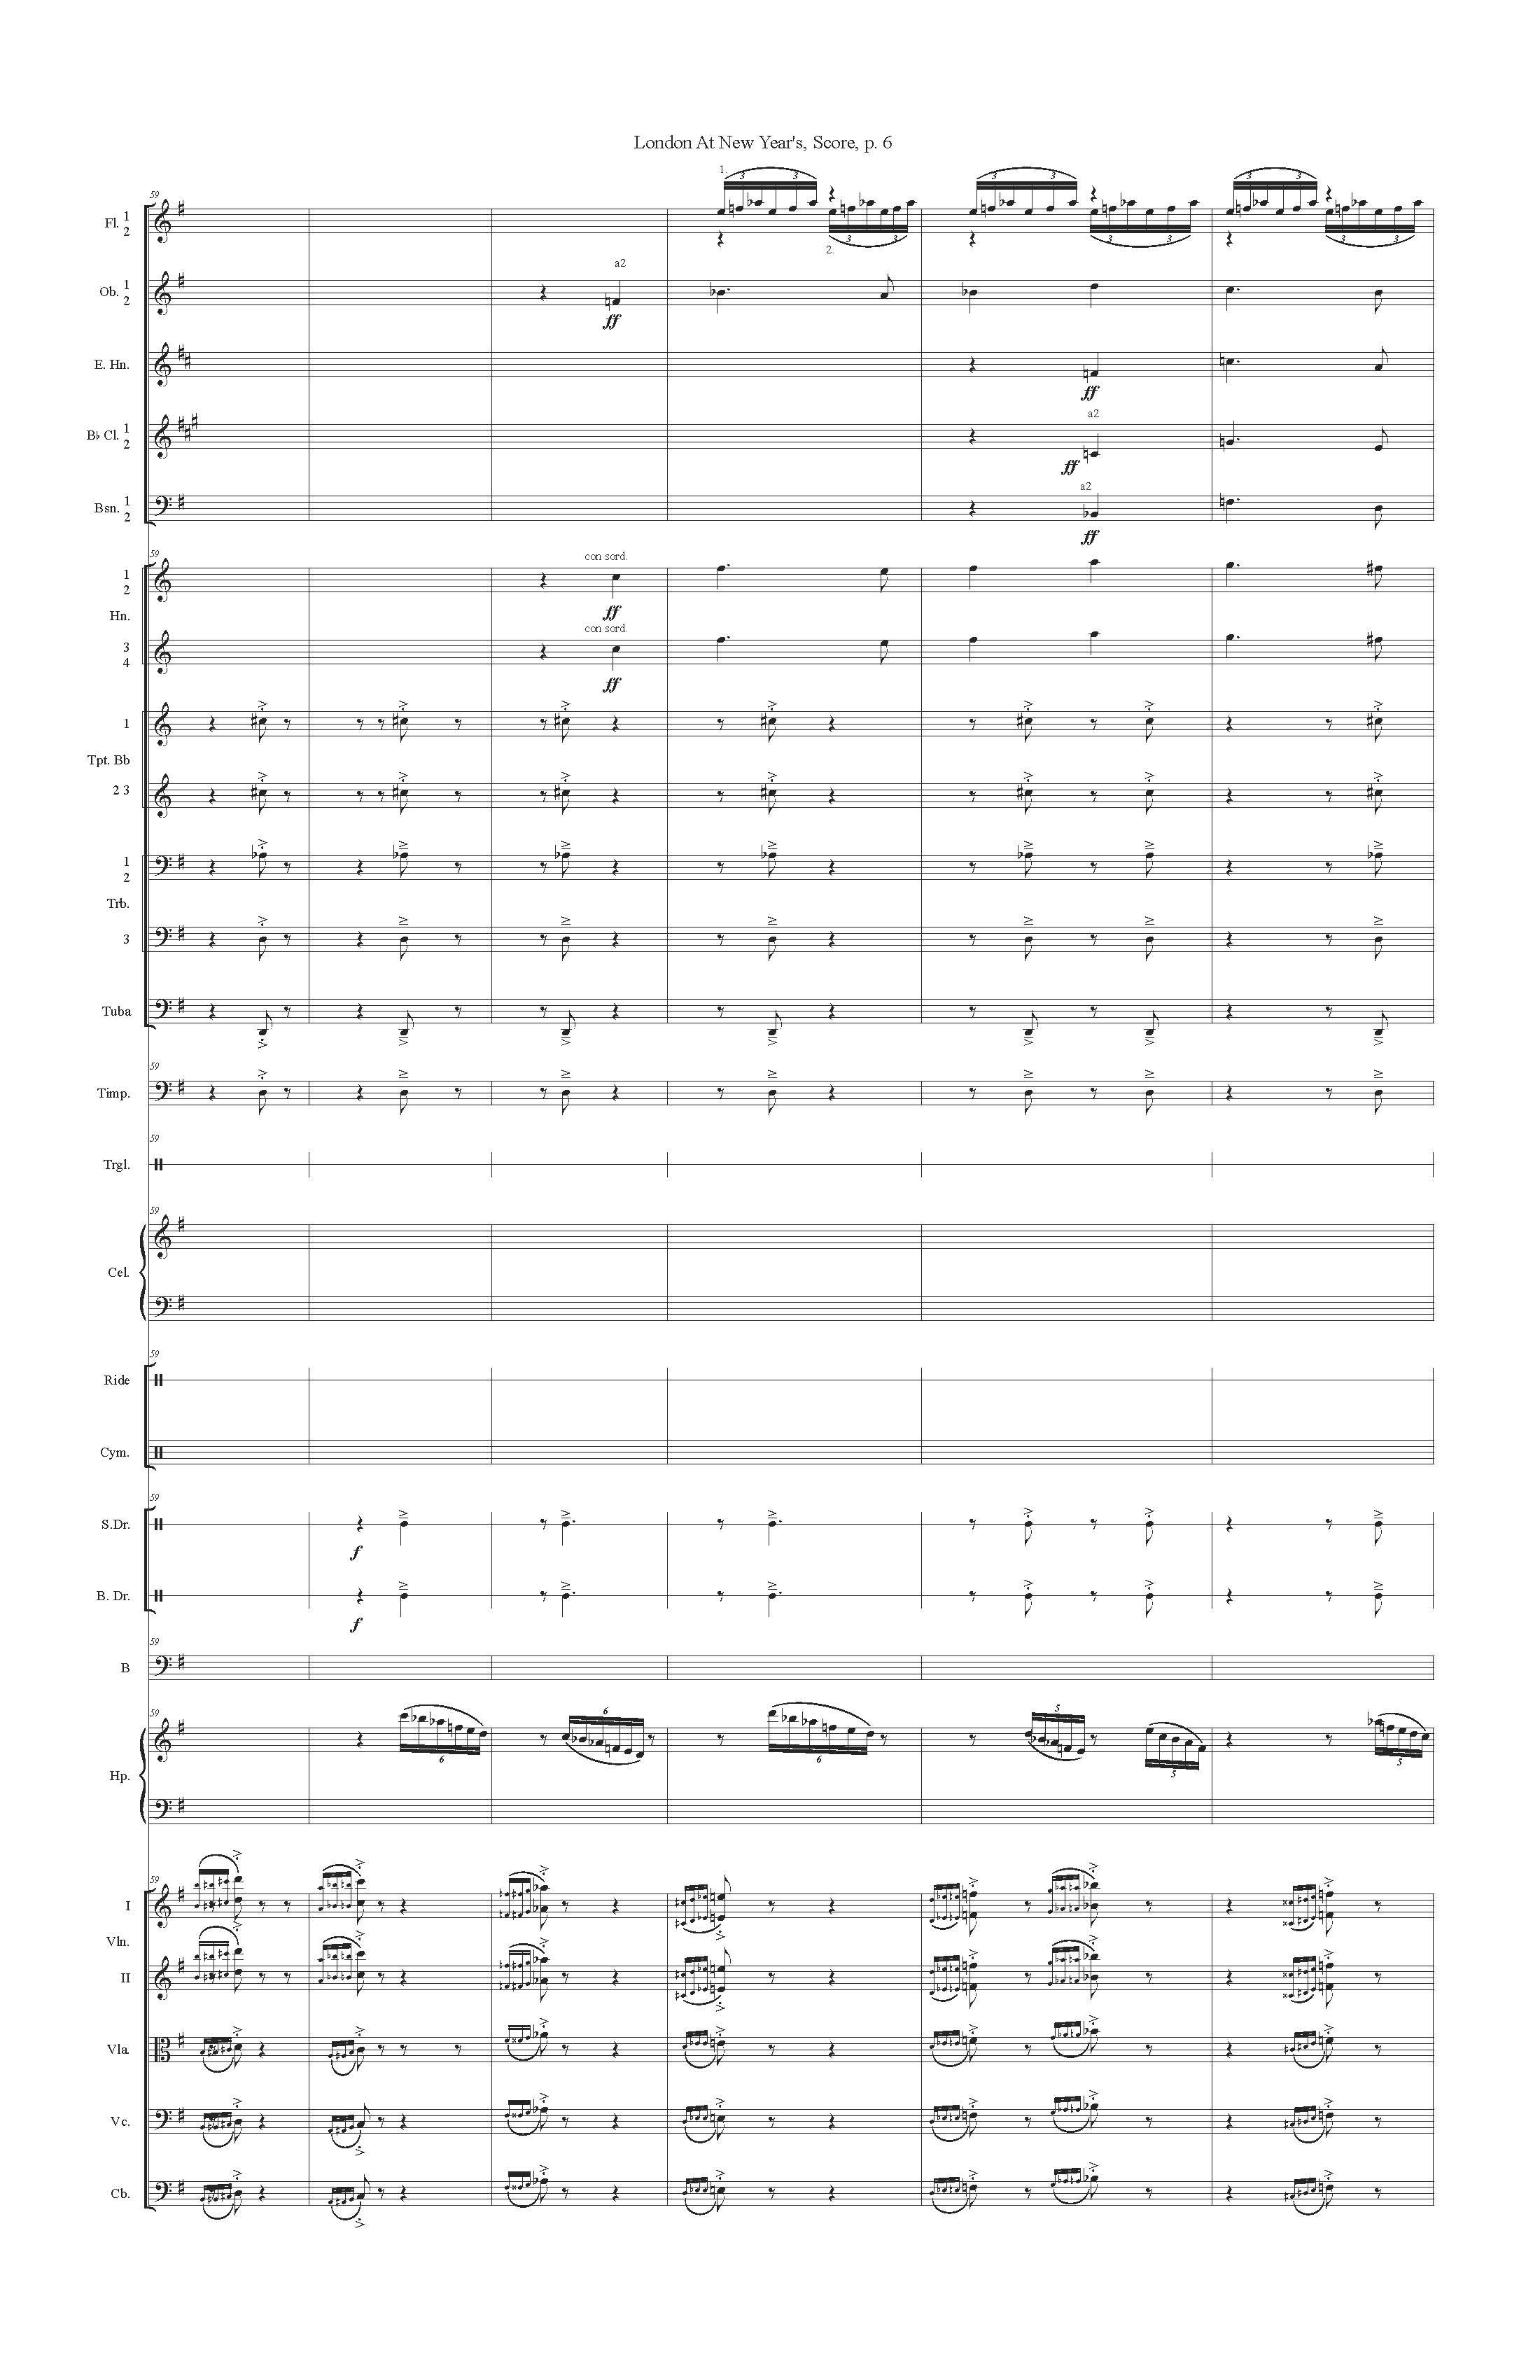 LONDON AT NEW YEARS ORCH - Score_Page_06.jpg